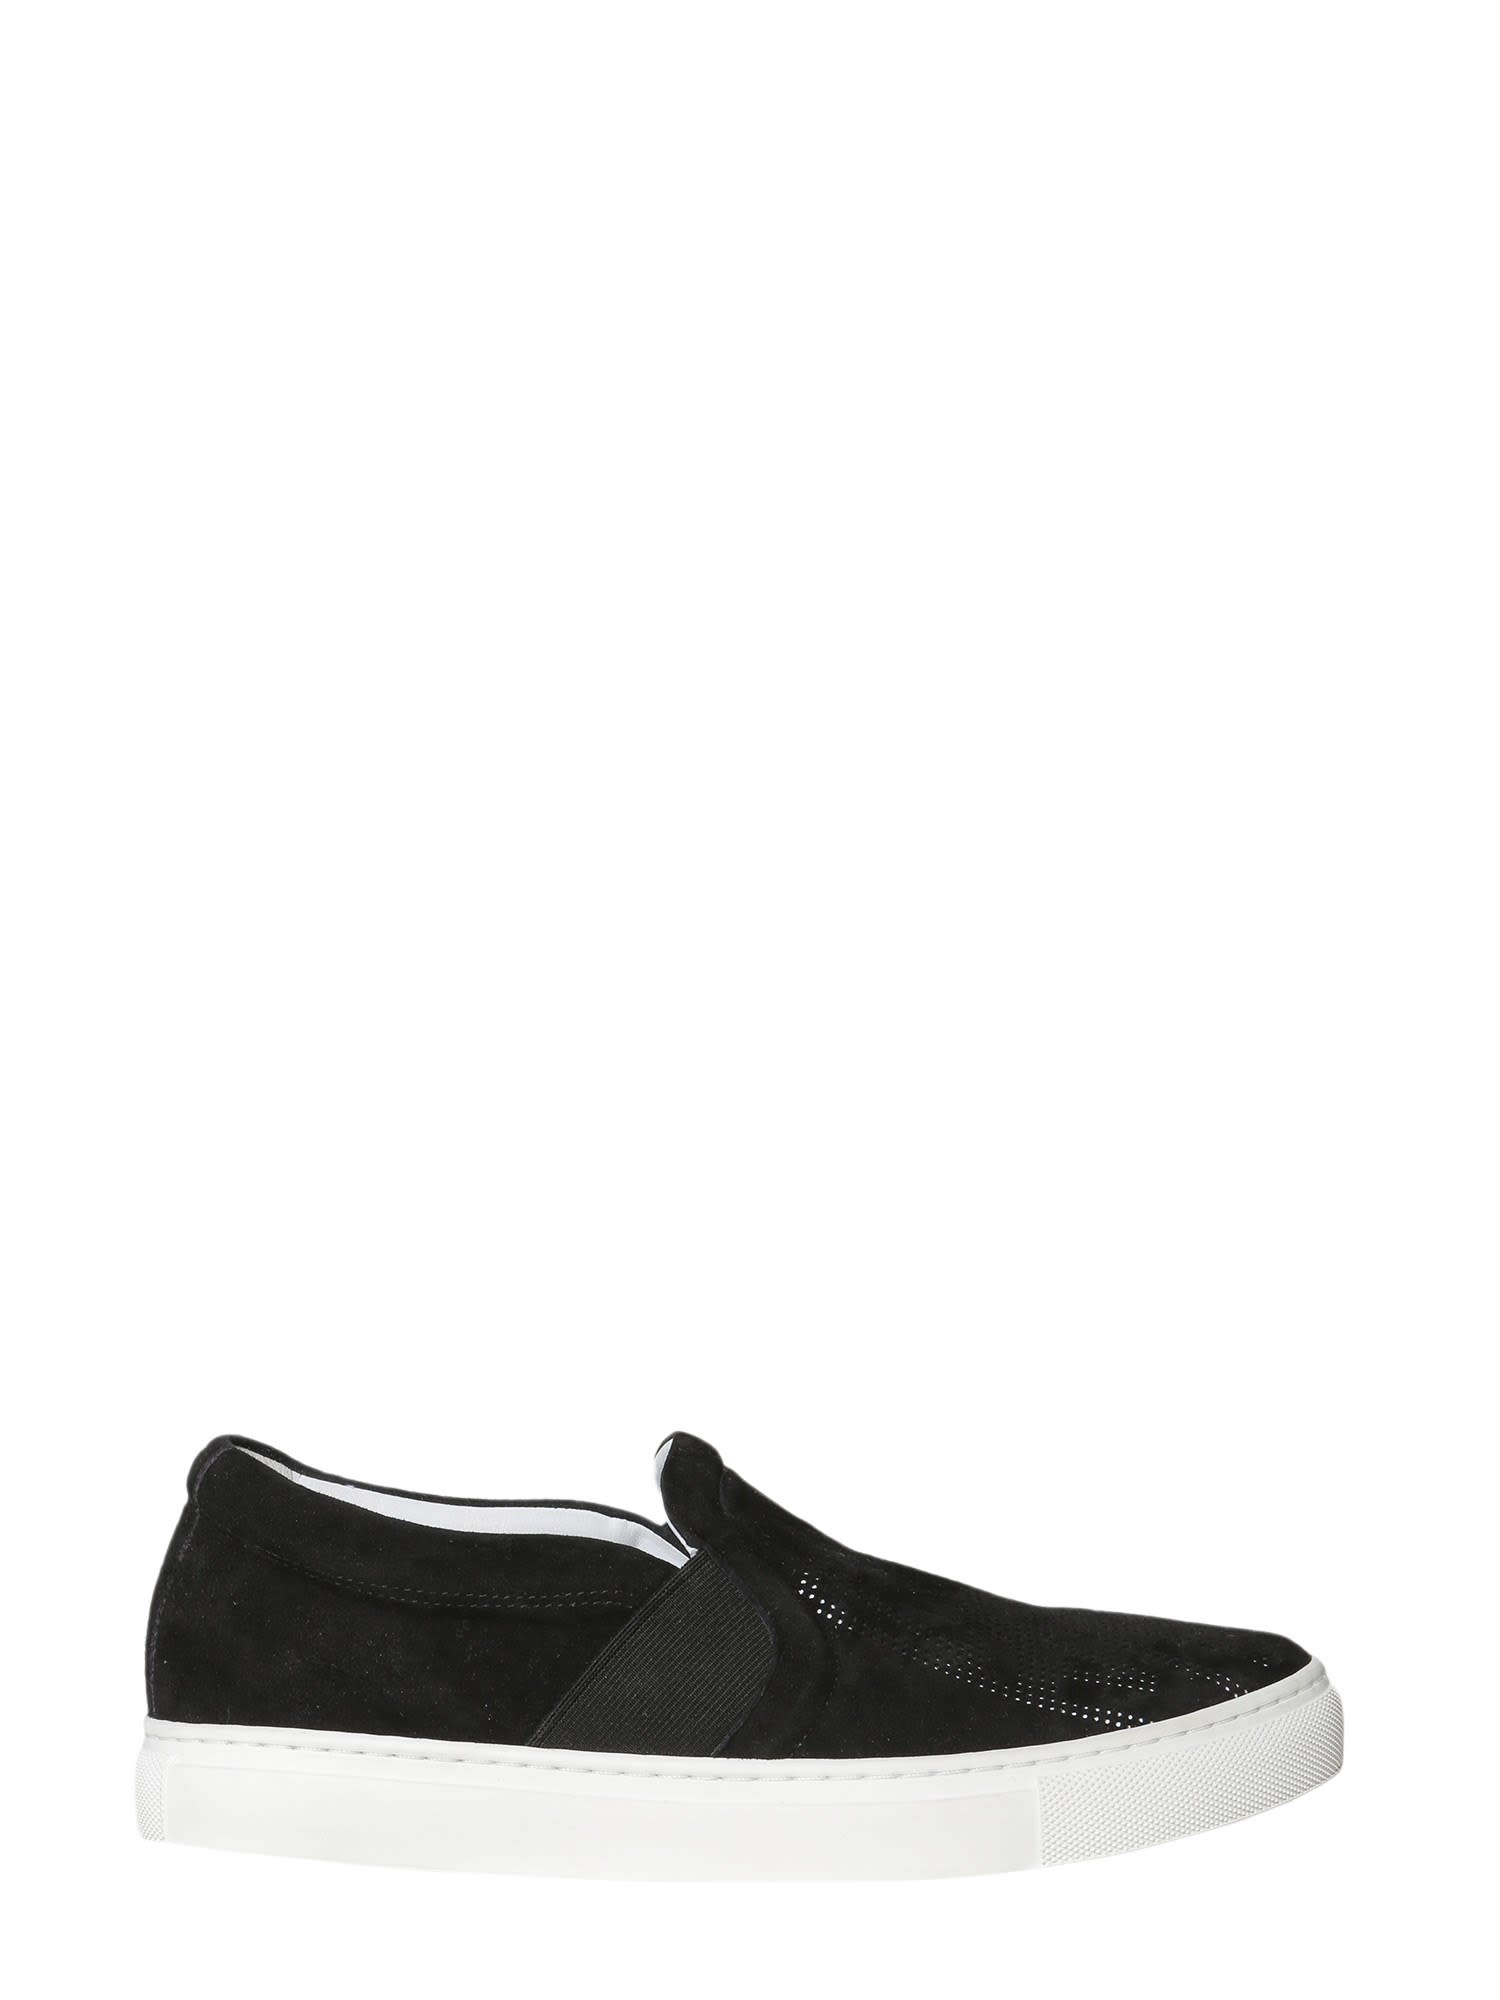 Buy Lanvin Slip-on With Openworked Logo online, shop Lanvin shoes with free shipping